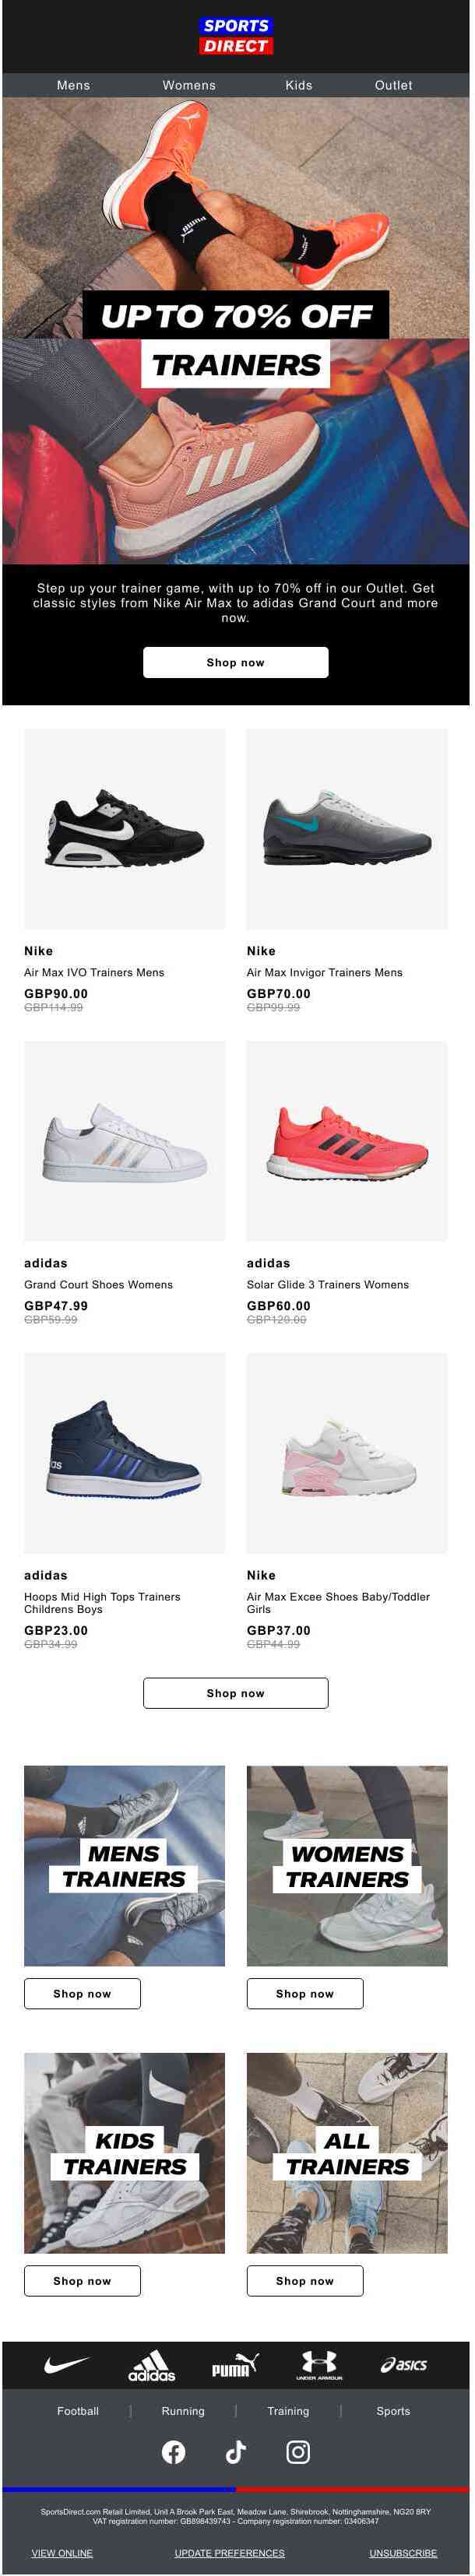 Trainers | UP TO 70% OFF 👟